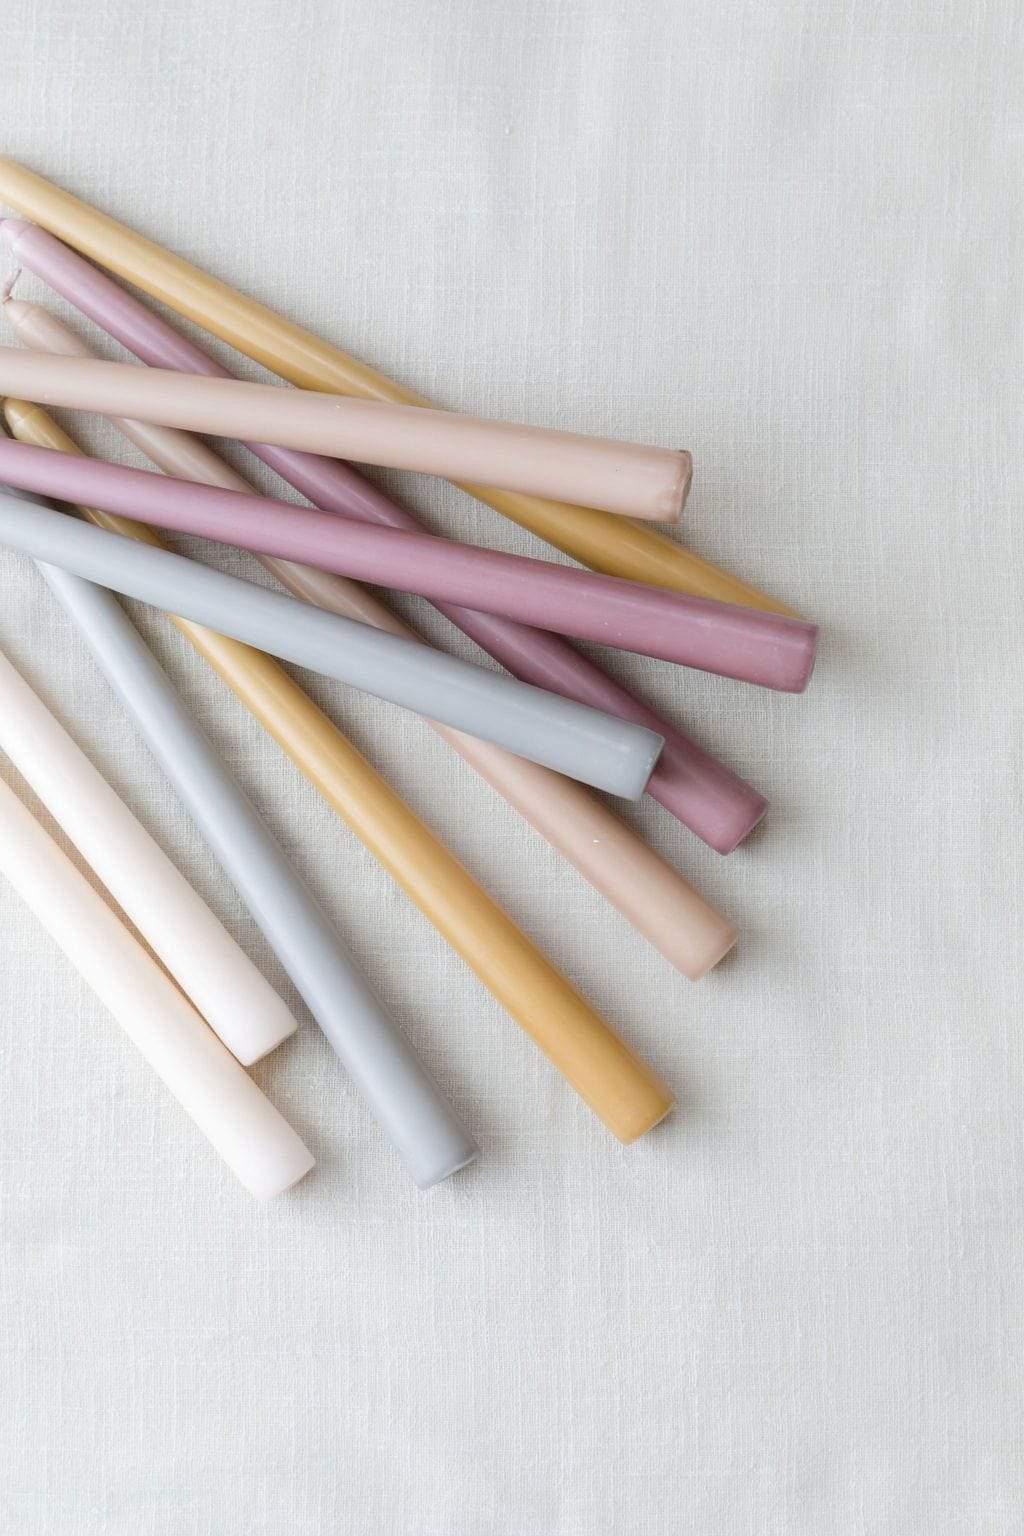 Pastel Tapered Candles For home table settings and home decor